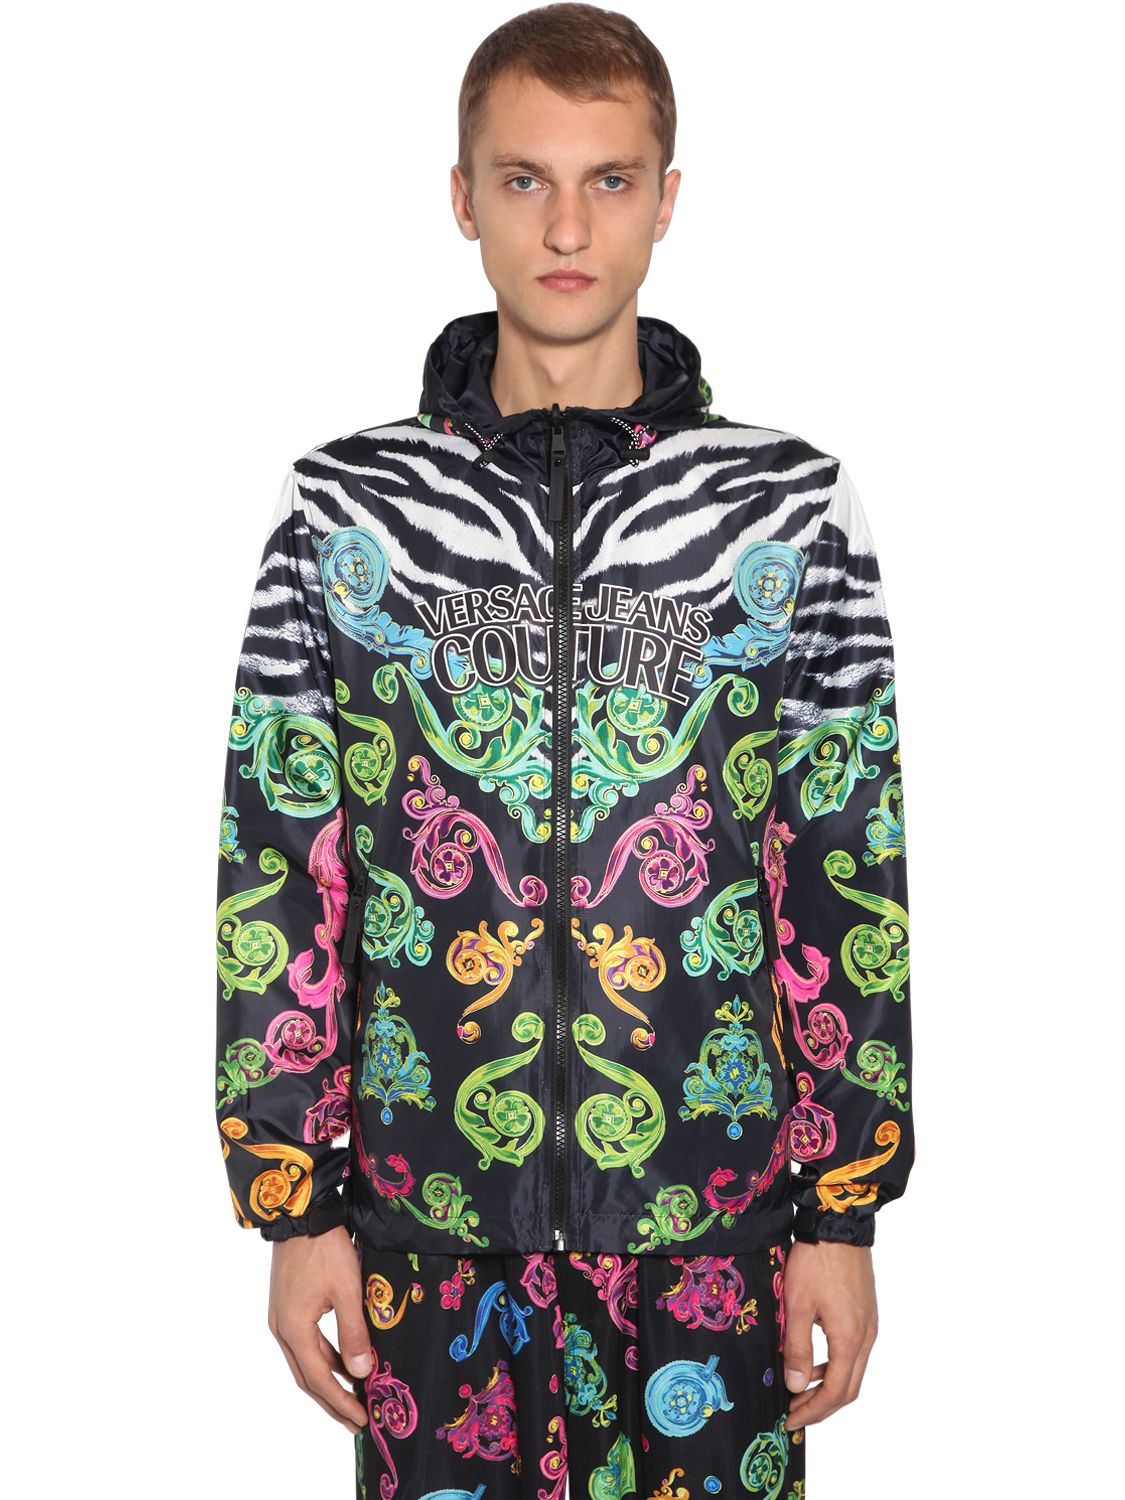 Reversible Hooded Printed Ripstop Jacket - VERSACE JEANS COUTURE - Modalova